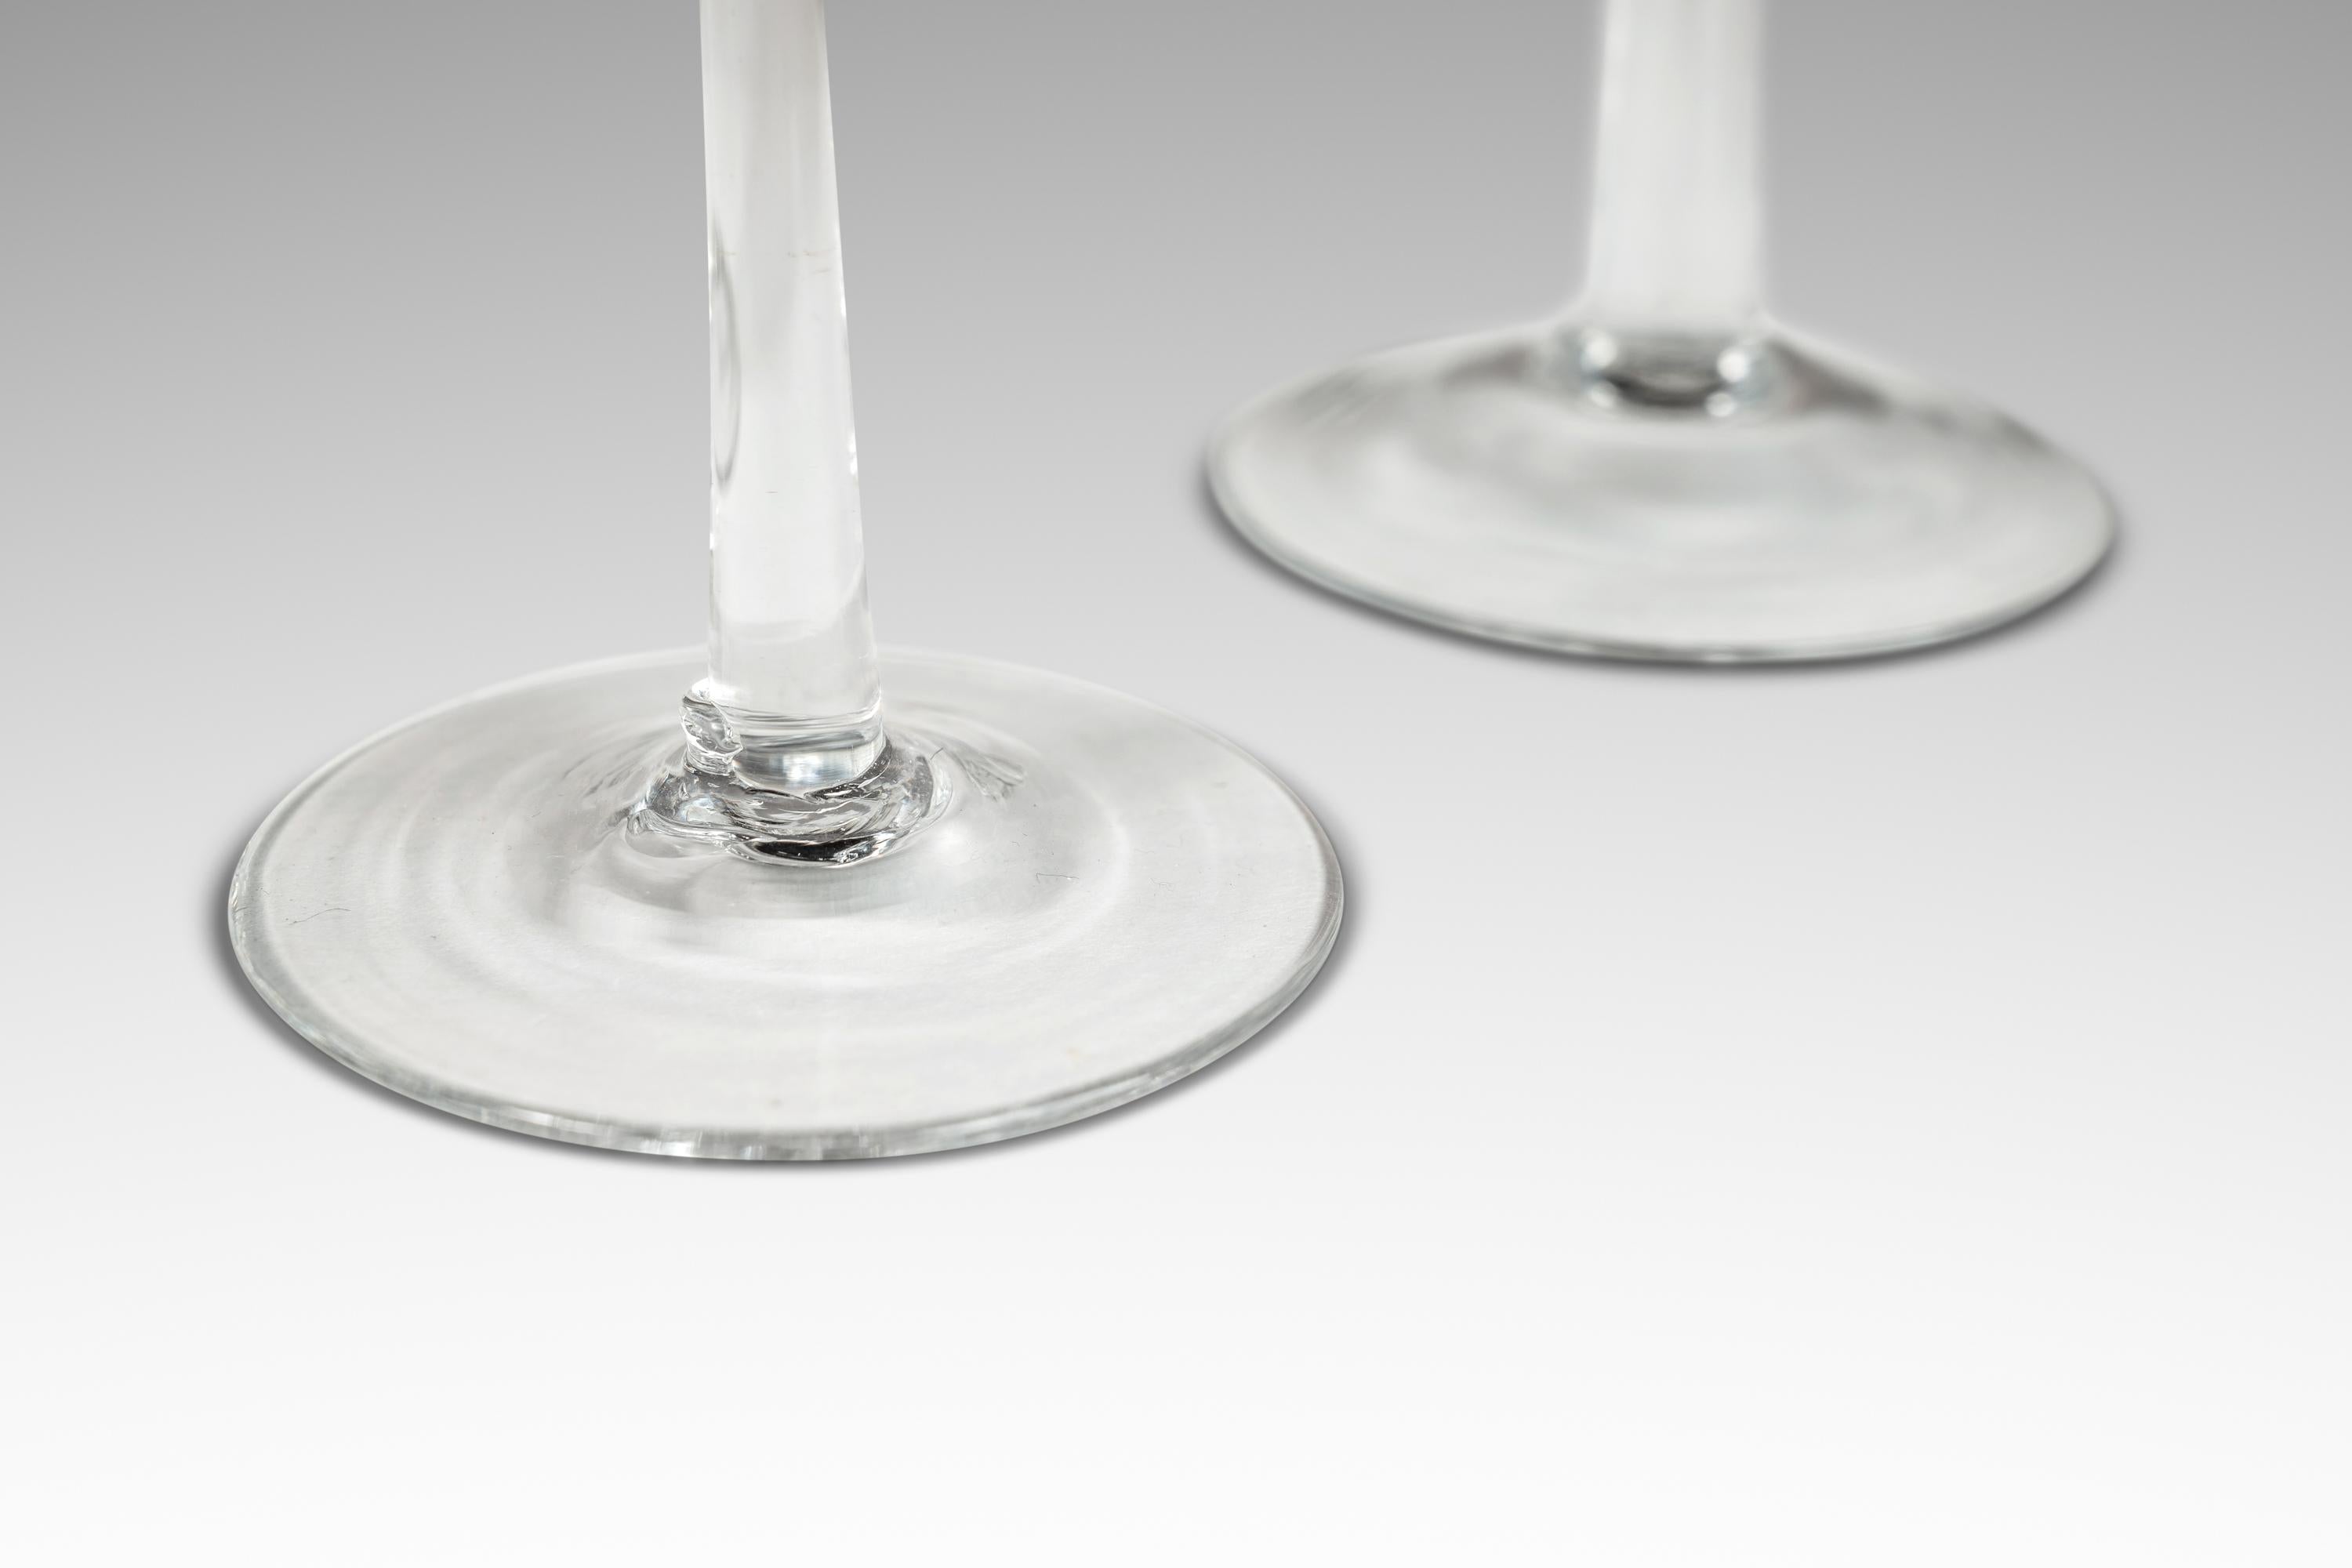 Introducing an artfully crafted set of four Italian Modern blown glass candlestick holders. Like snowflakes no two are alike and each is ever so slightly different in size and shape. With elegant elongated shapes these exquisite art pieces feature a